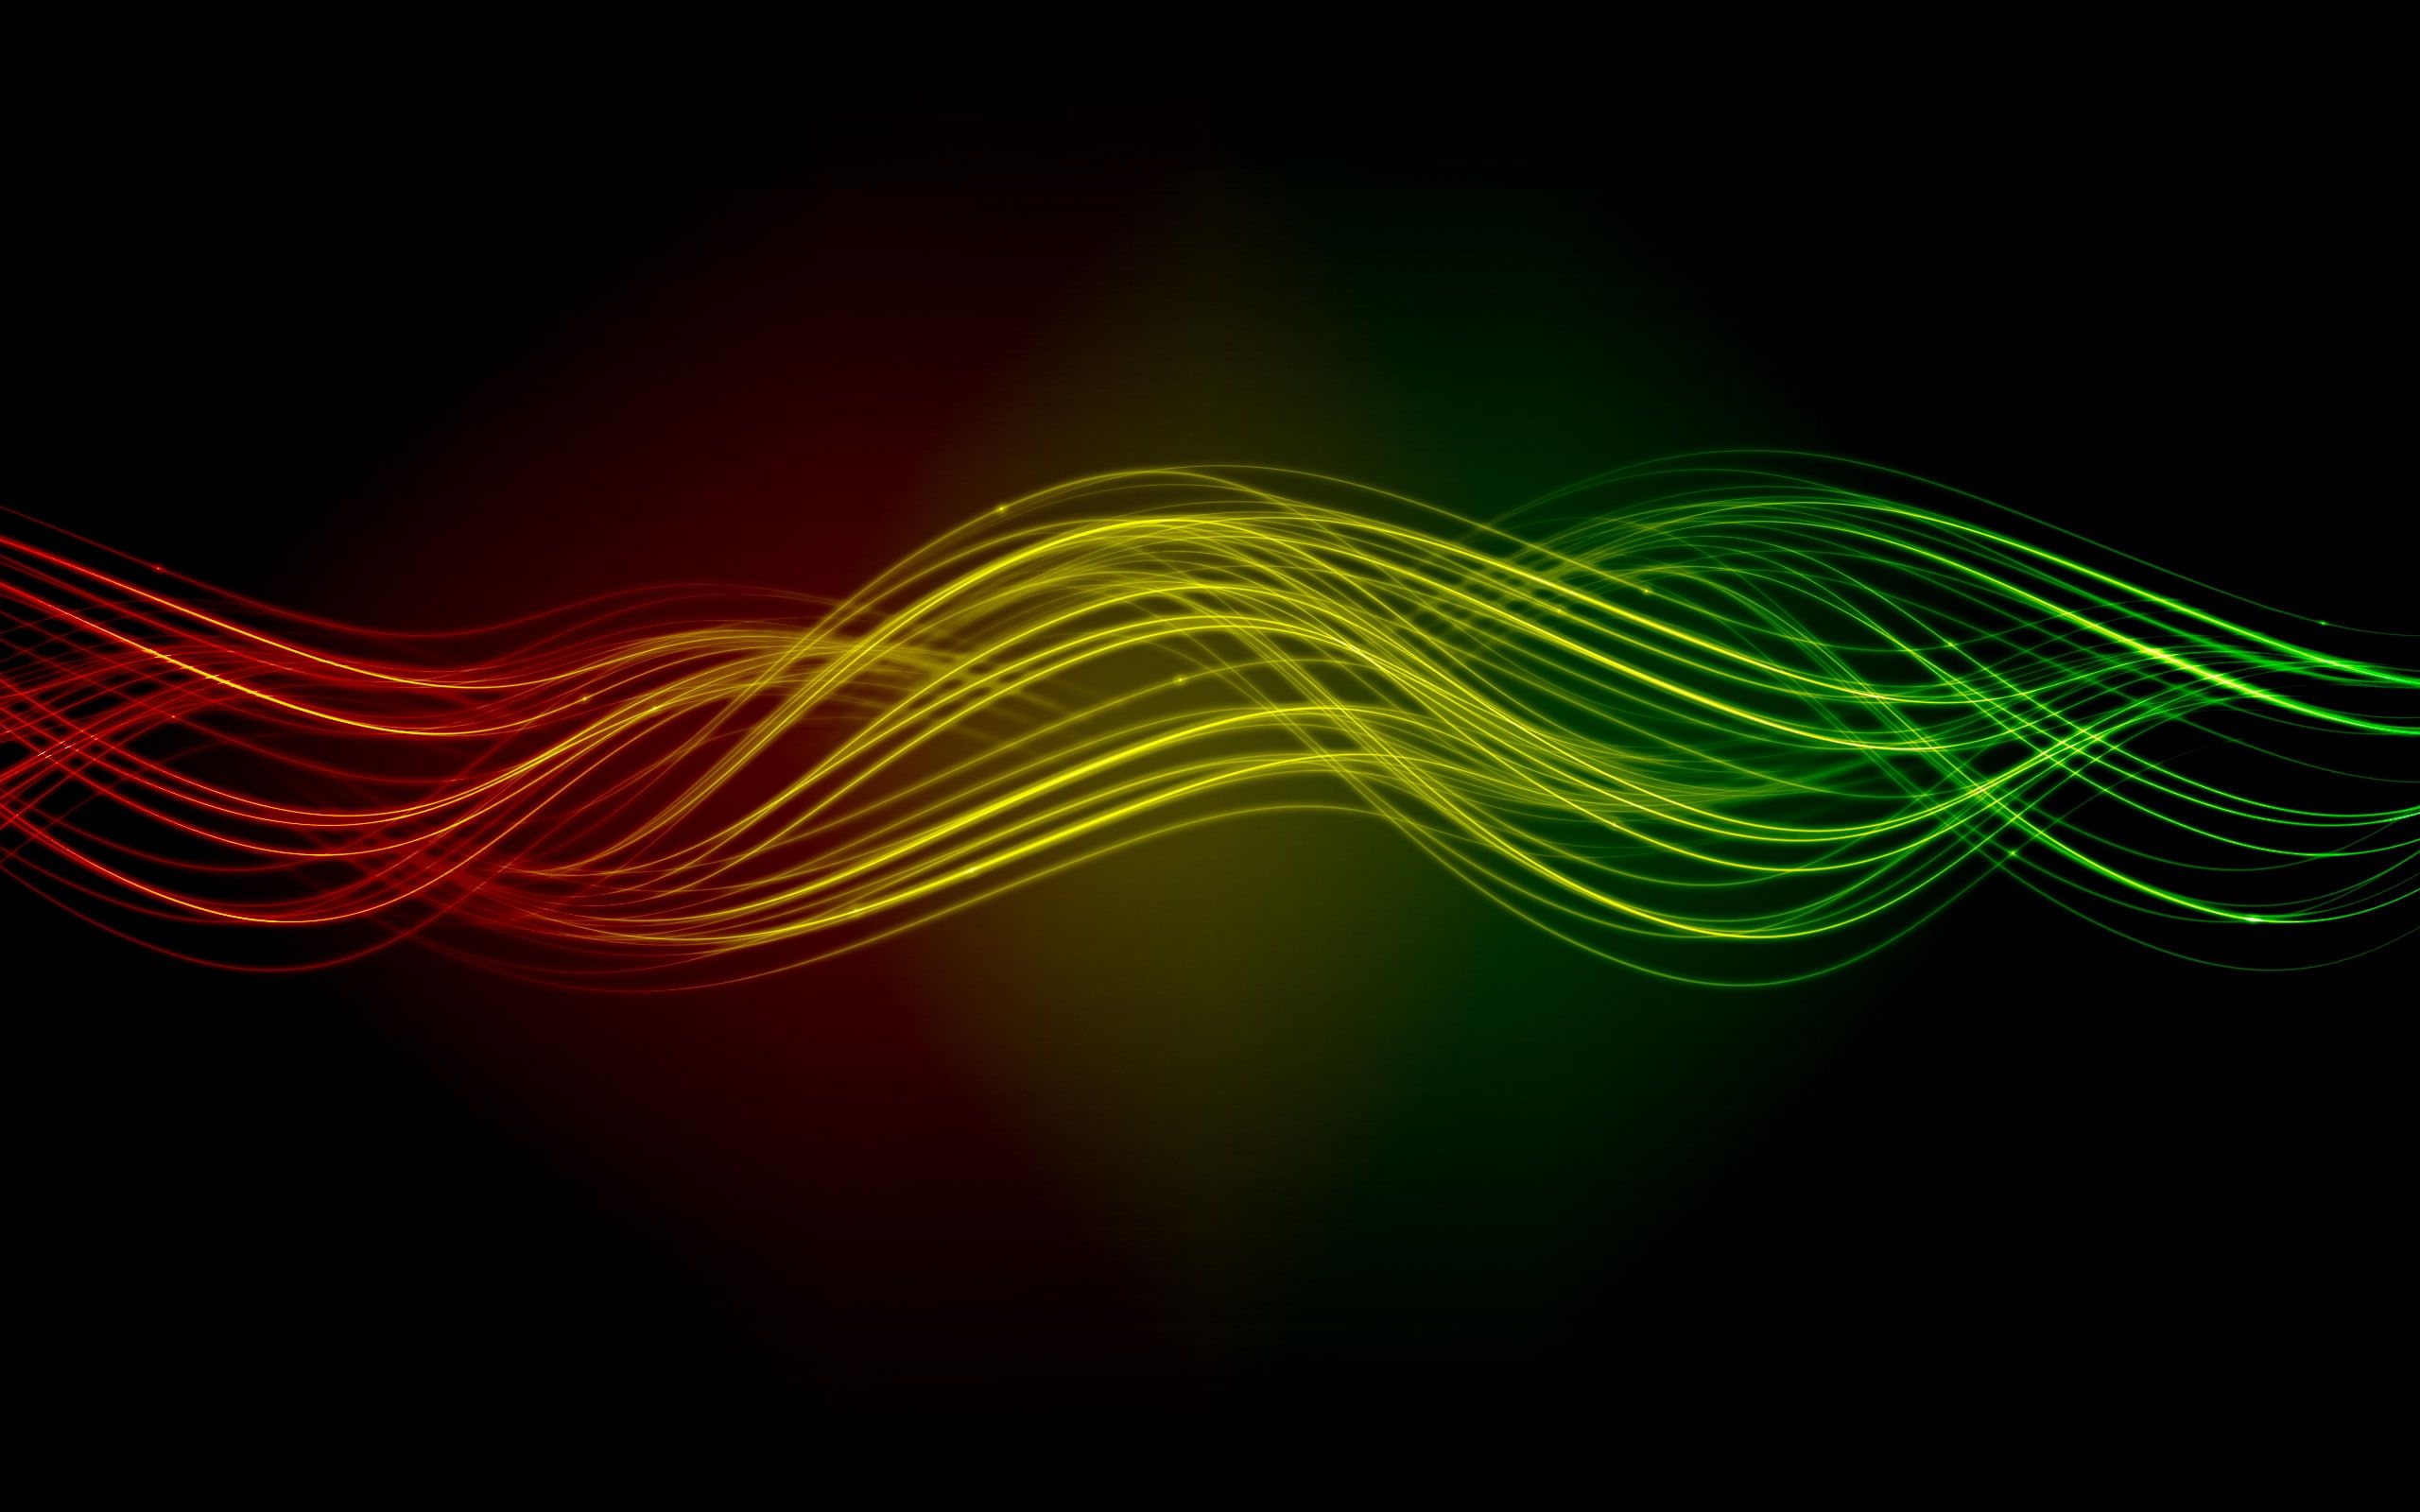 green abstract red multicolor yellow waves digital art lines simple background black background 2 Art Bla. Waves wallpaper, Simple background, Free HD wallpaper